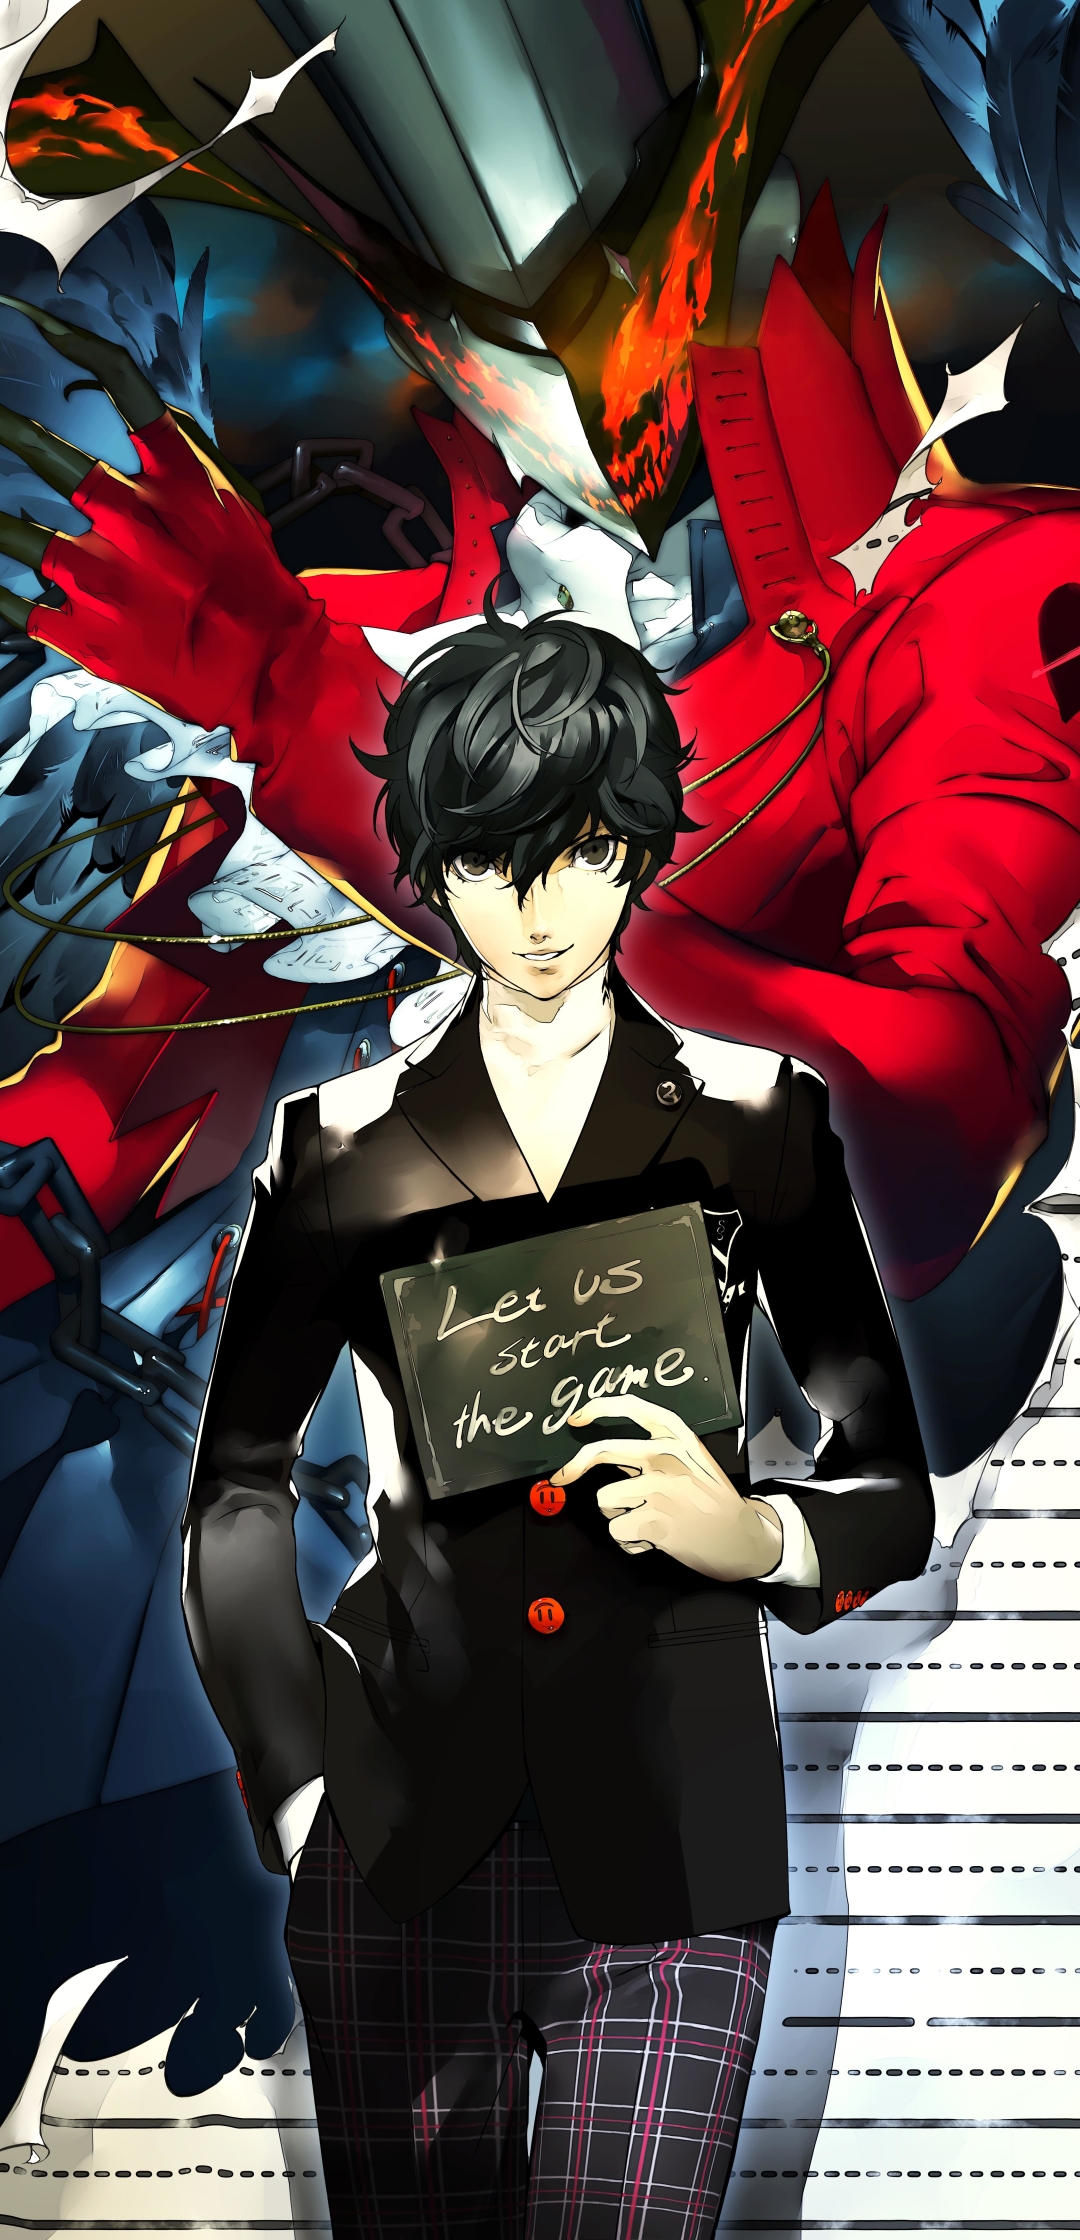 1080x2240 persona 5 1080x2240 resolution wallpaper hd games 4k wallpapers images photos and background 1080x2240 resolution wallpaper hd